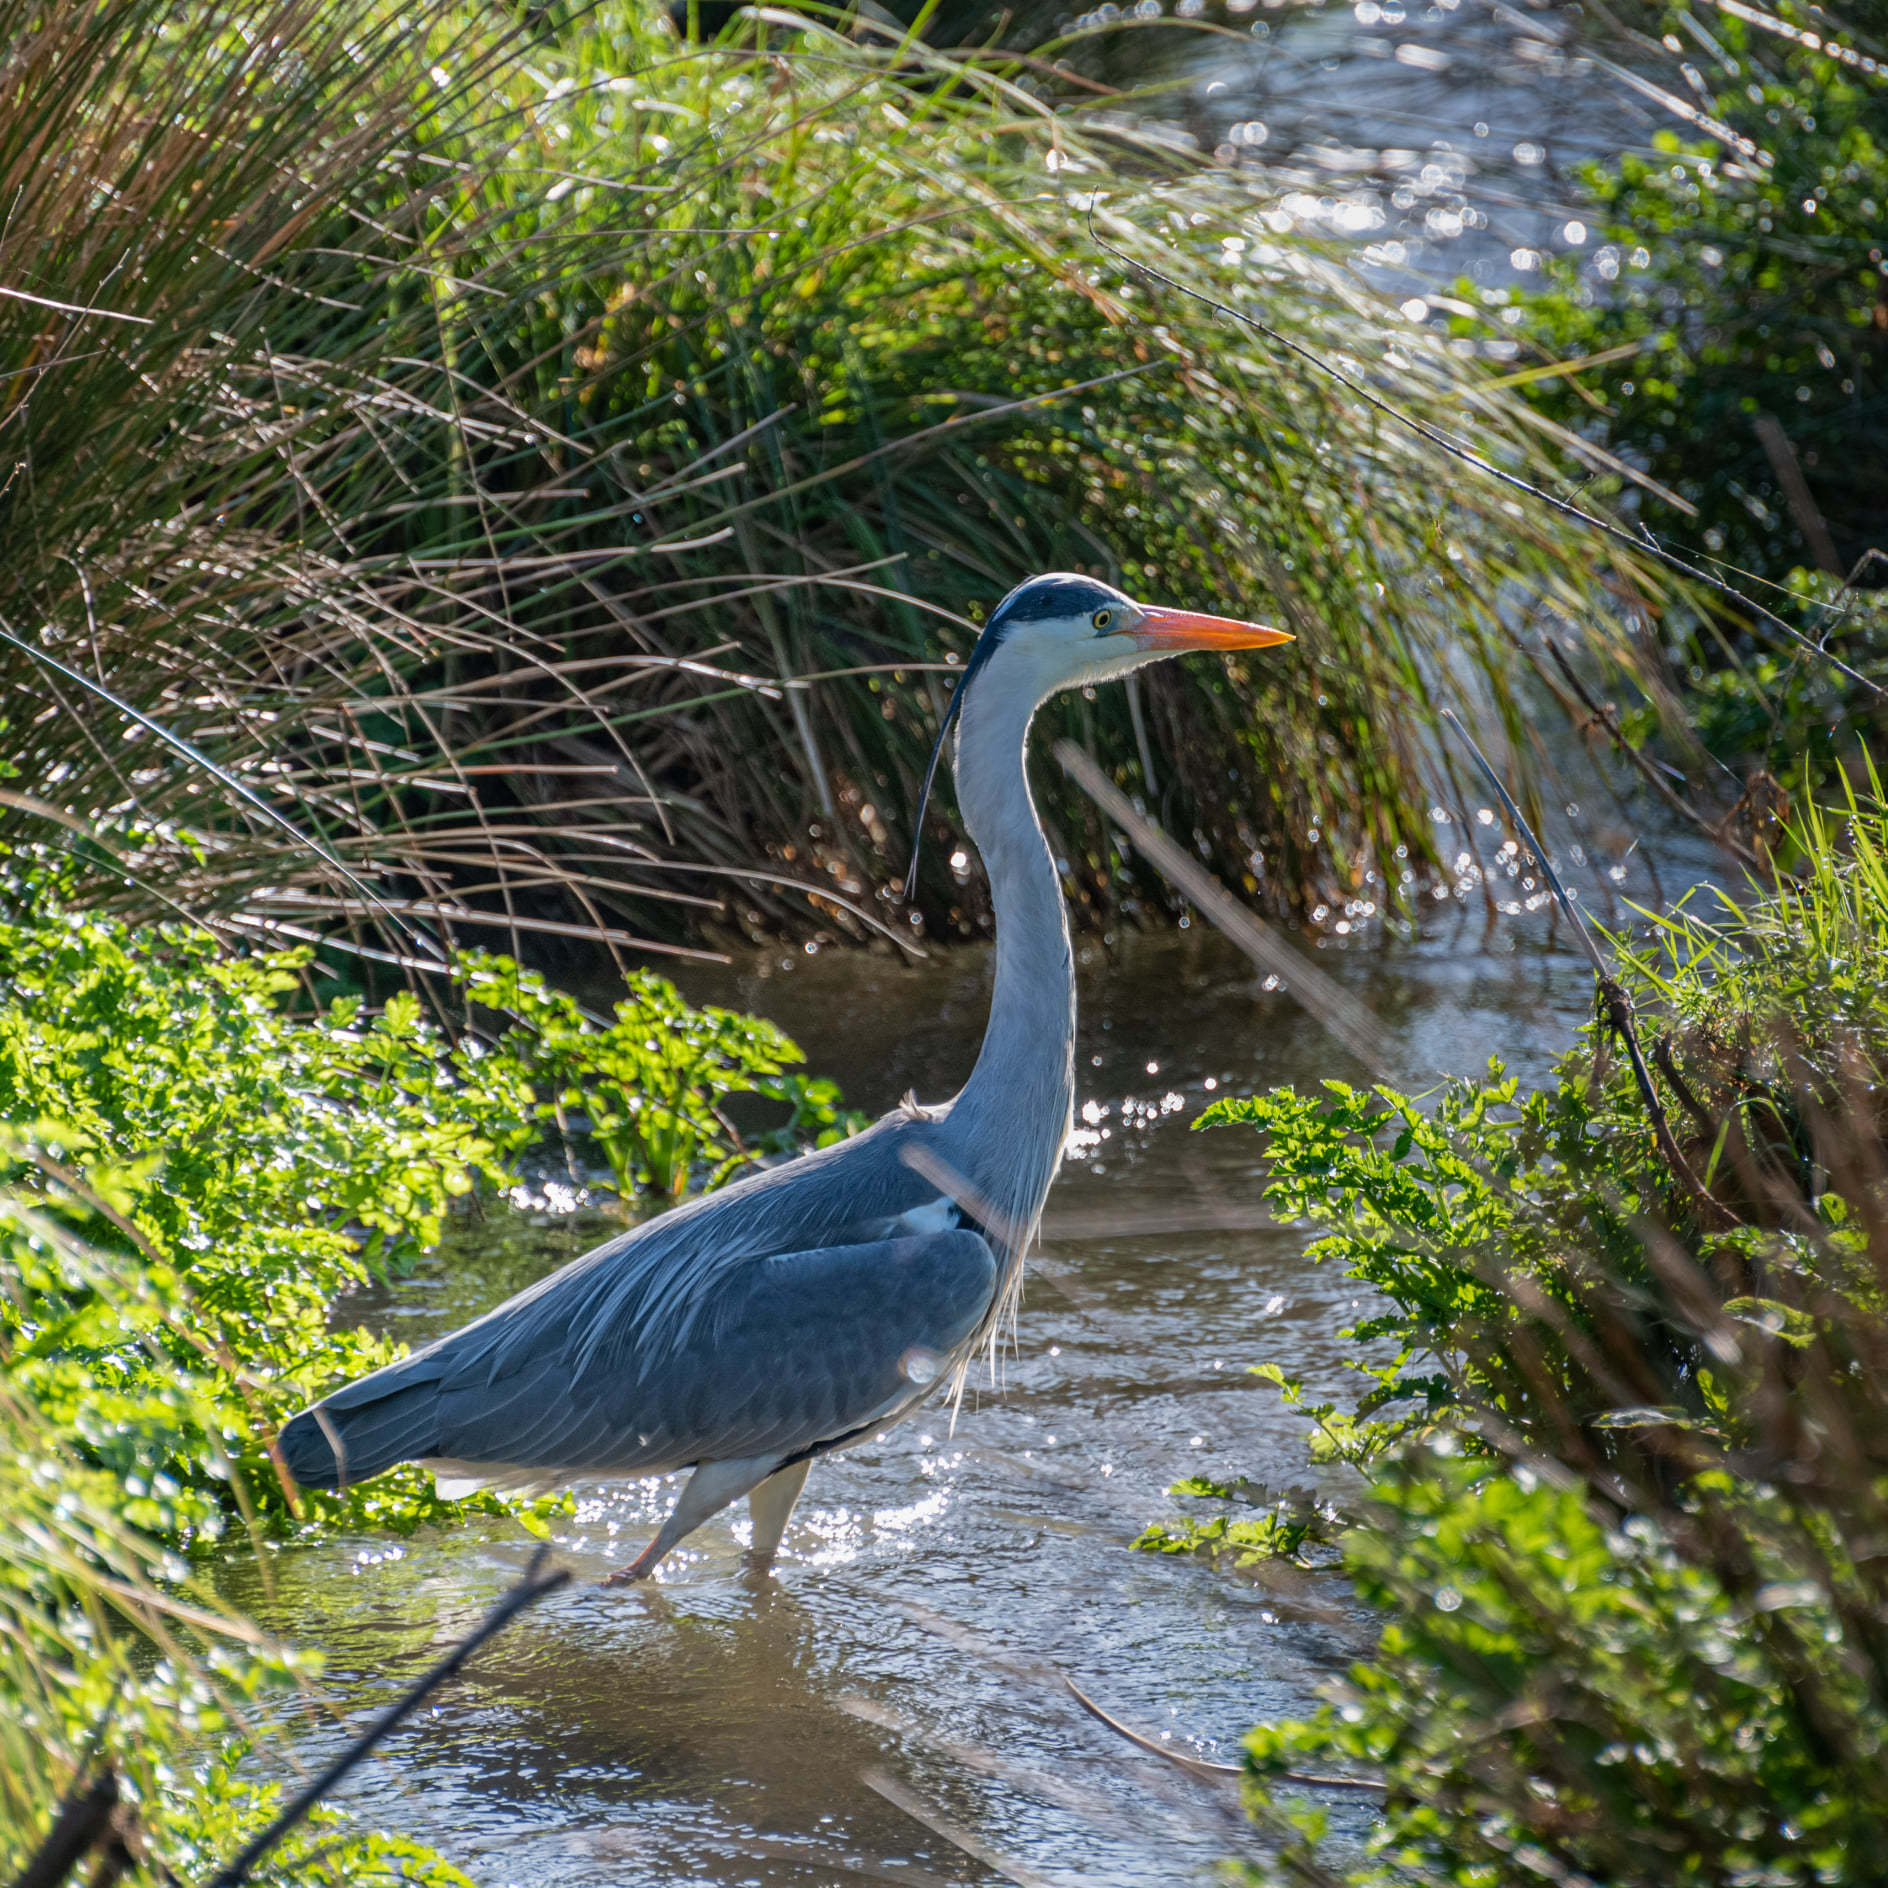 Heron after lunch, by Mark Quilter